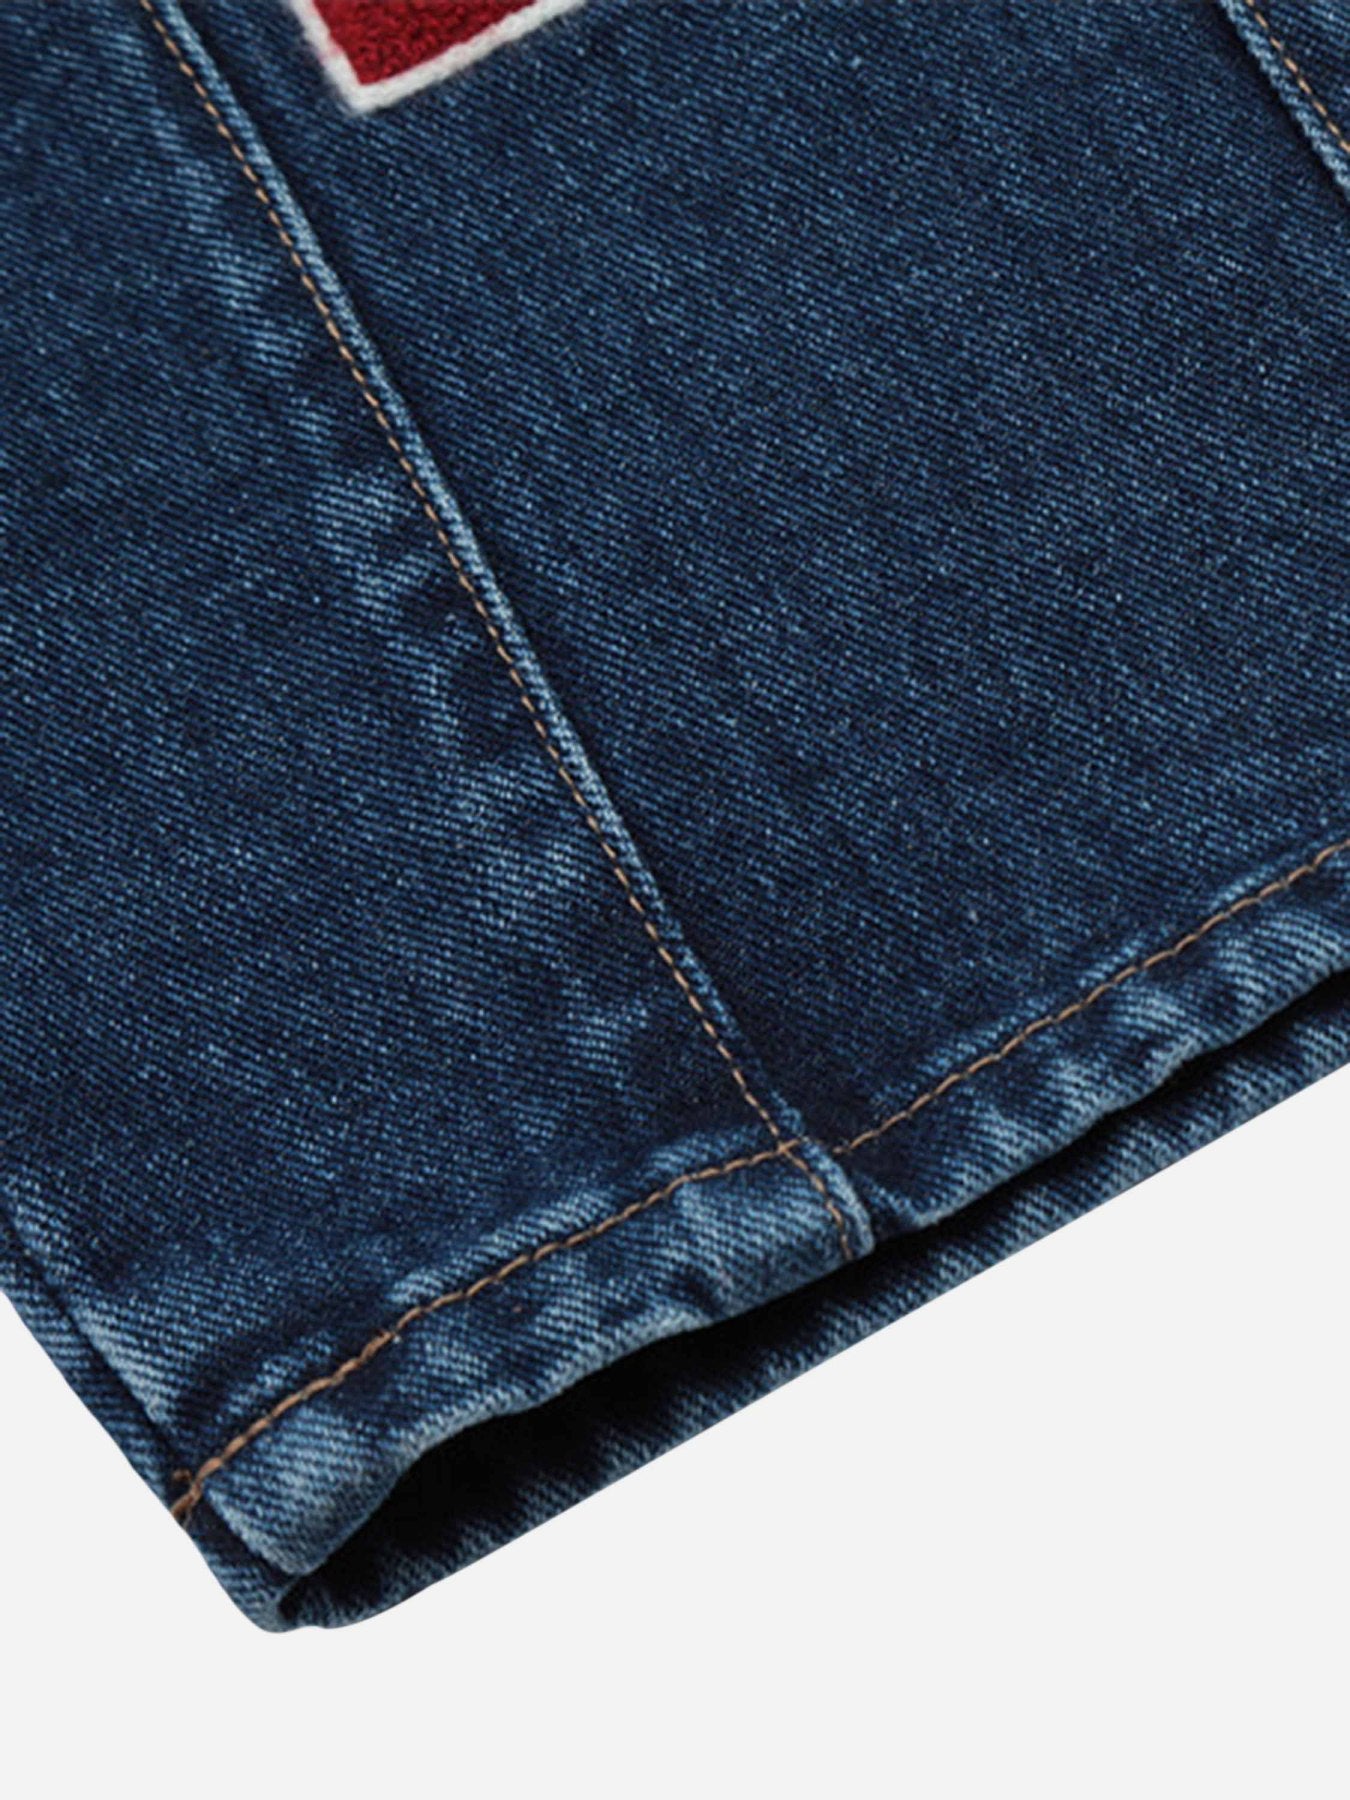 Thesupermade Towel Embroidery Backstrap Jeans